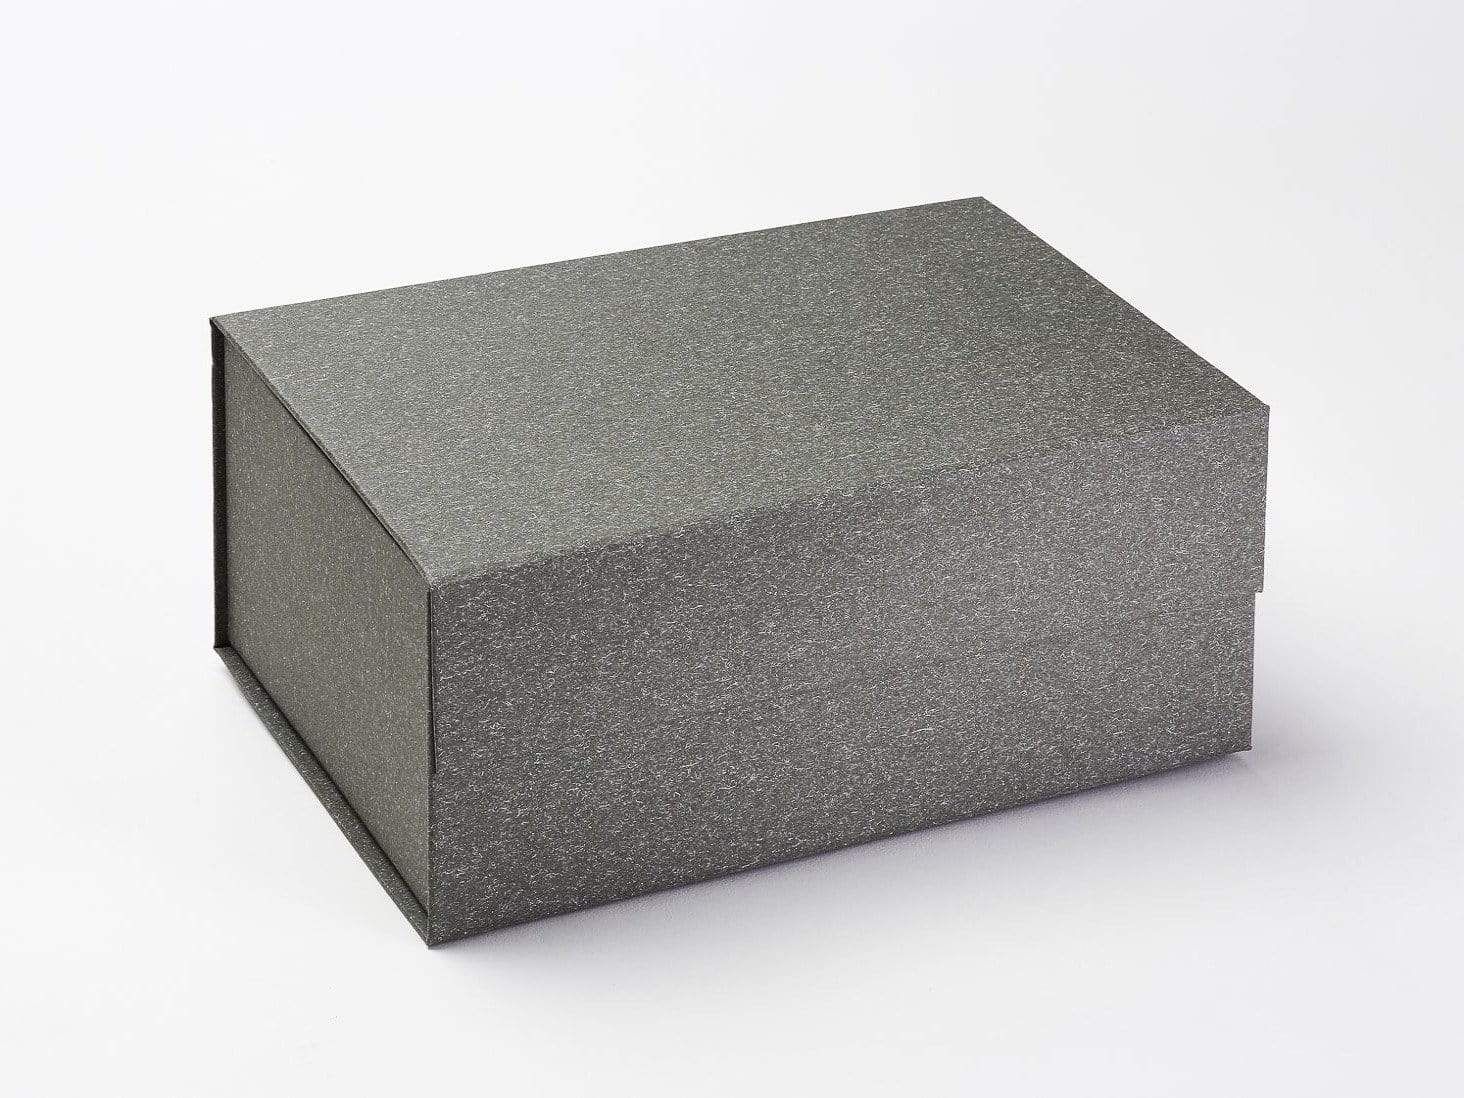 Naked Gray® A5 Deep Folding Gift Box with Magnetic Closure